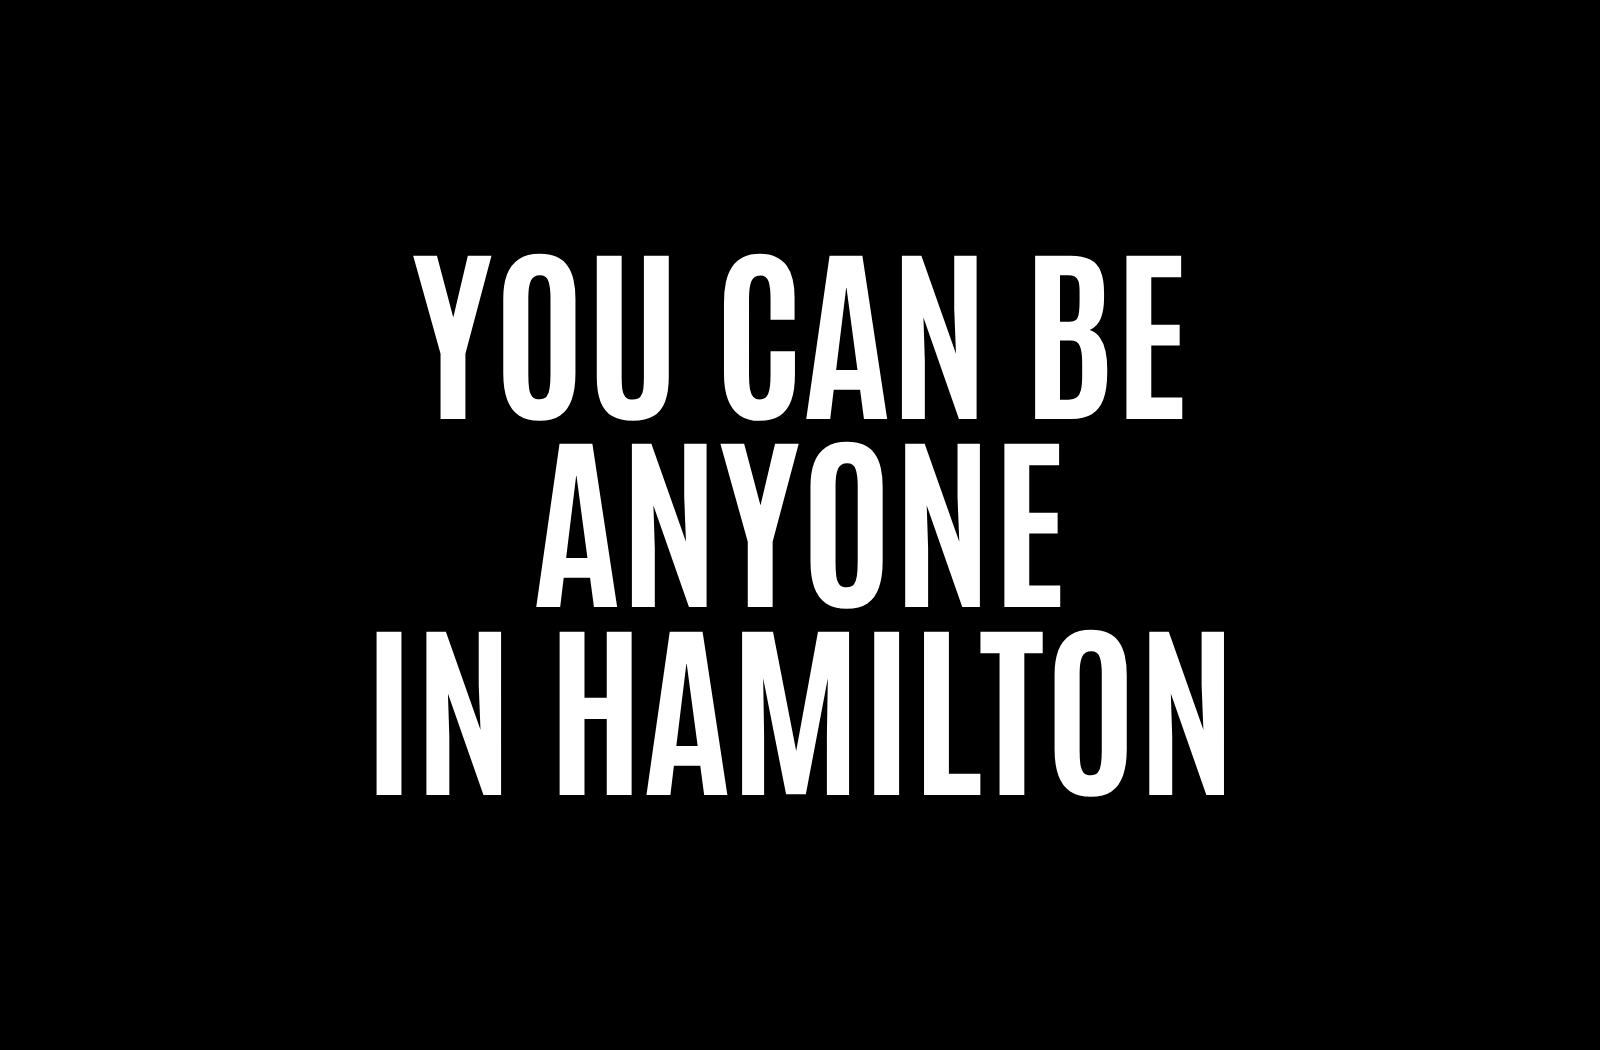 Black background with white text in all caps that says you can be anyone in Hamilton